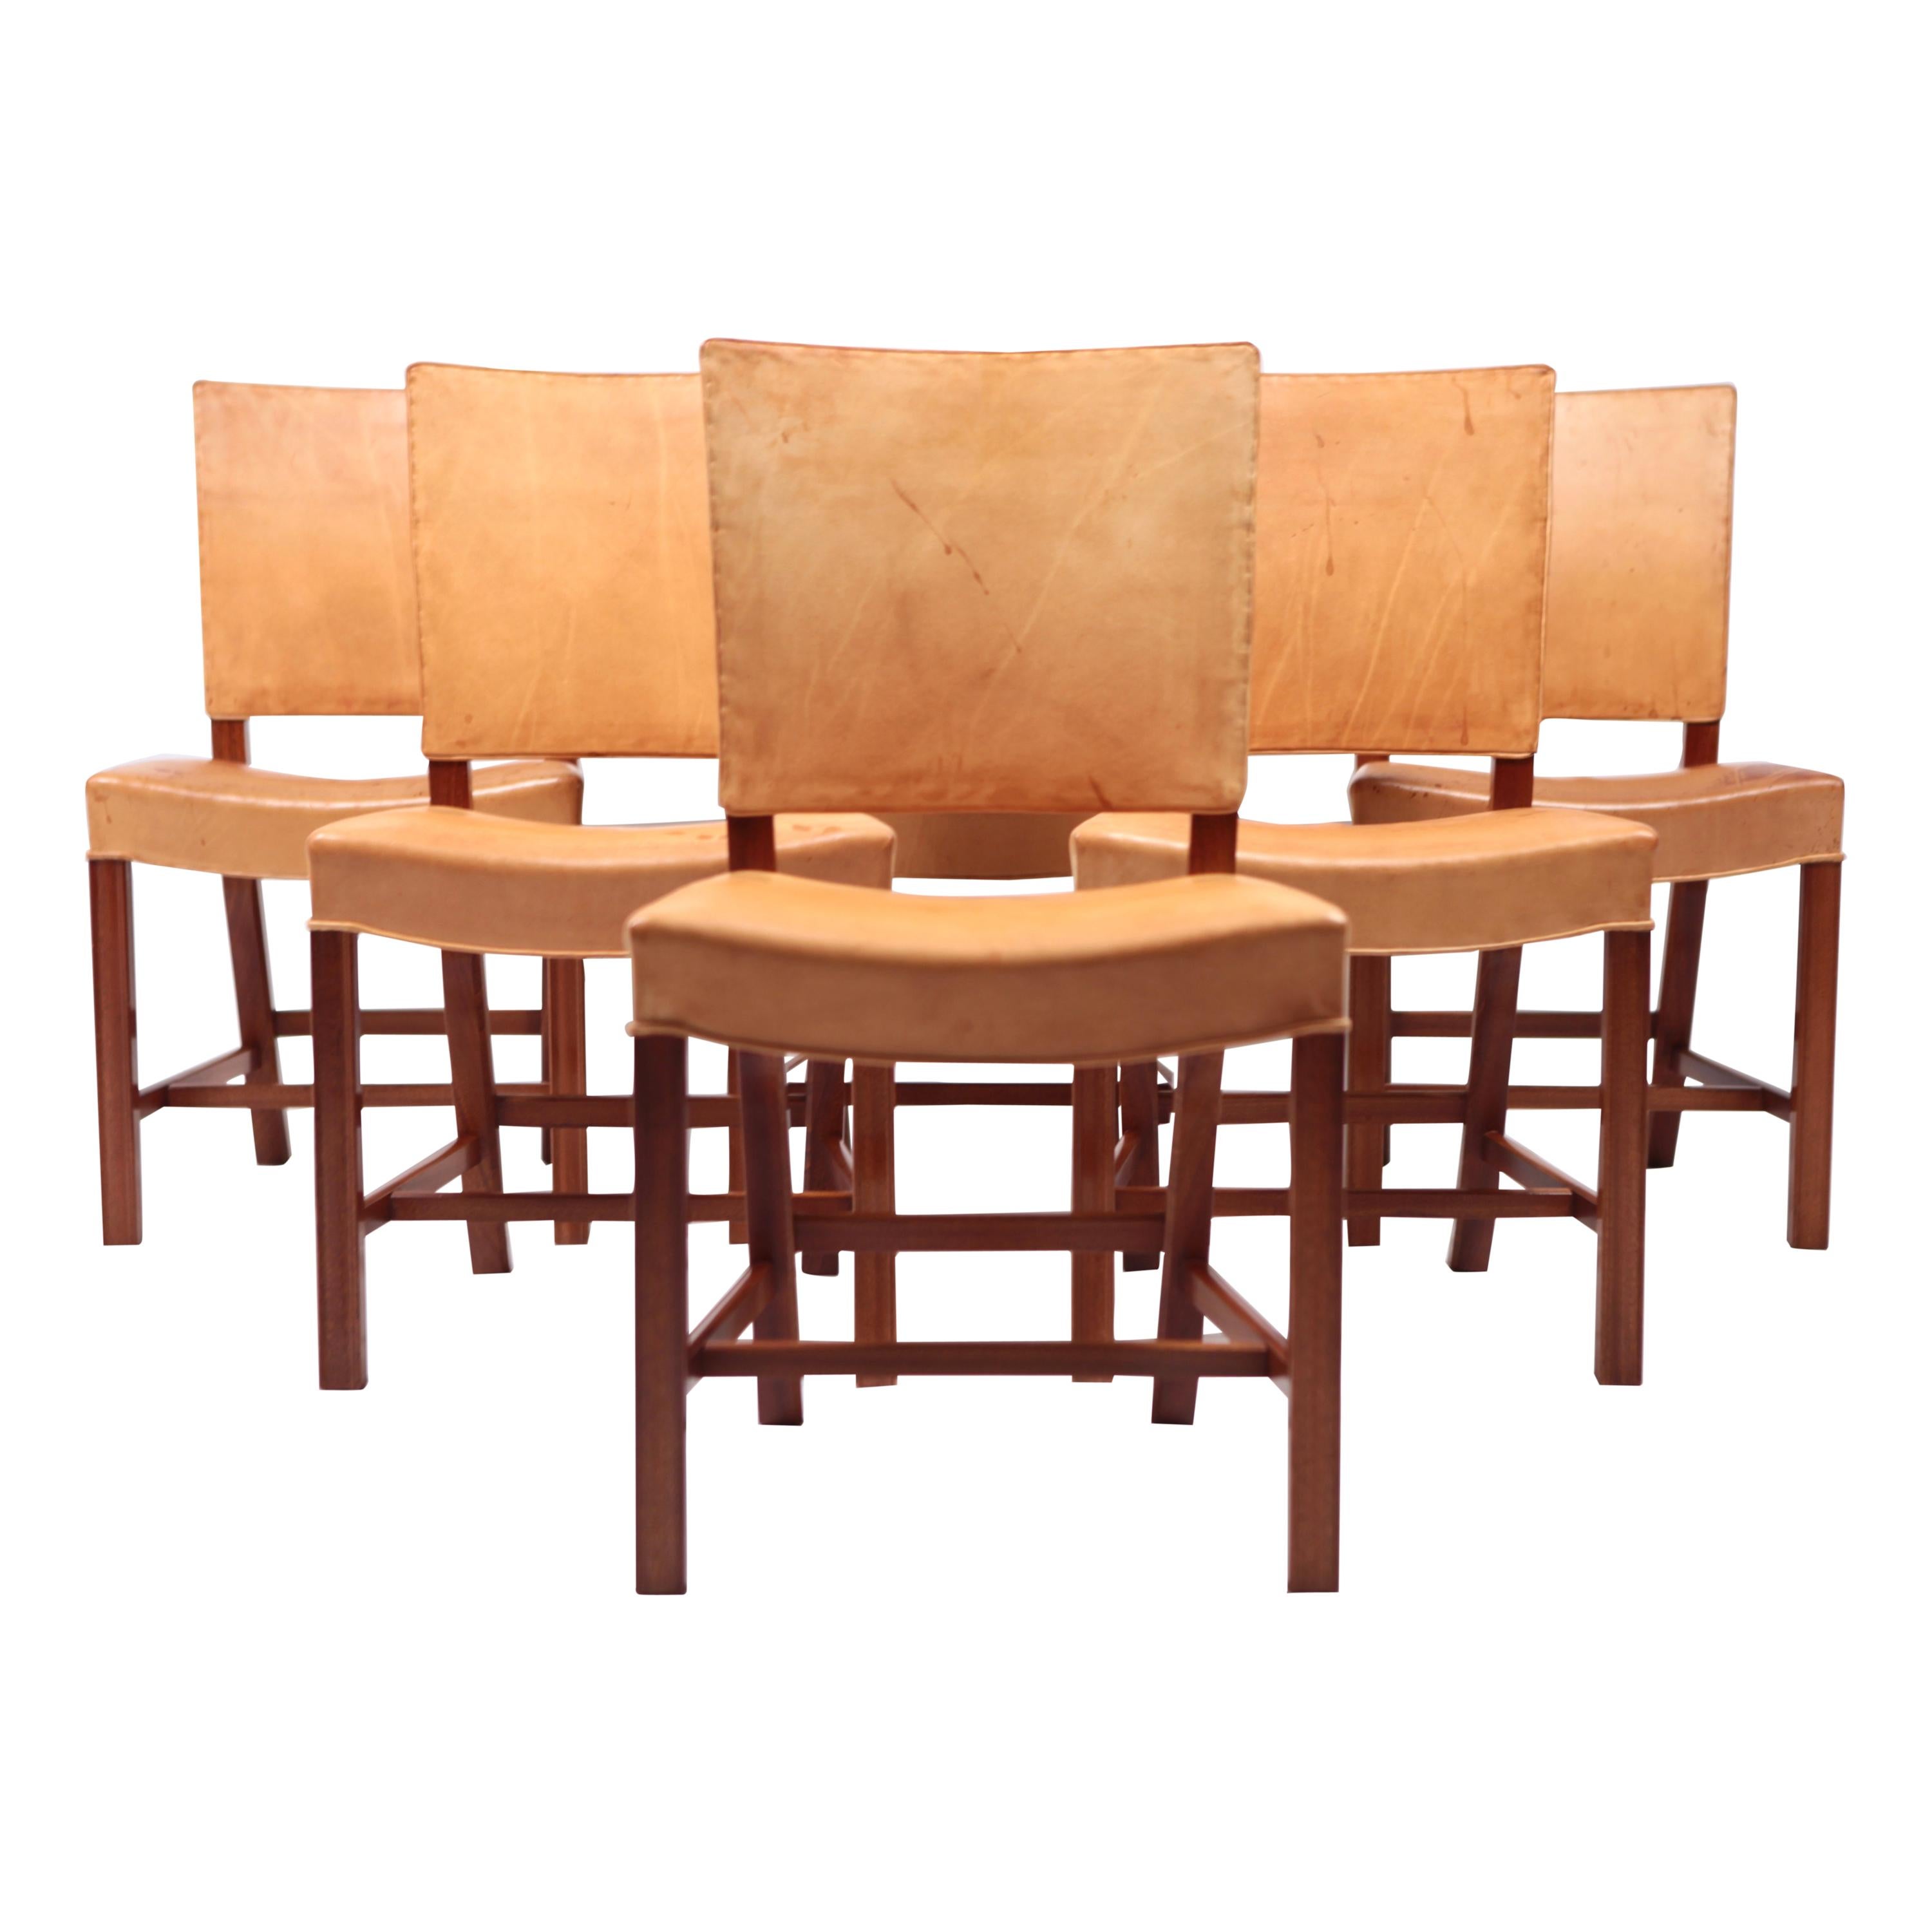 Set of Six Dining Chairs "The Red Chair" by Kaare Klint, Denmark, 1927